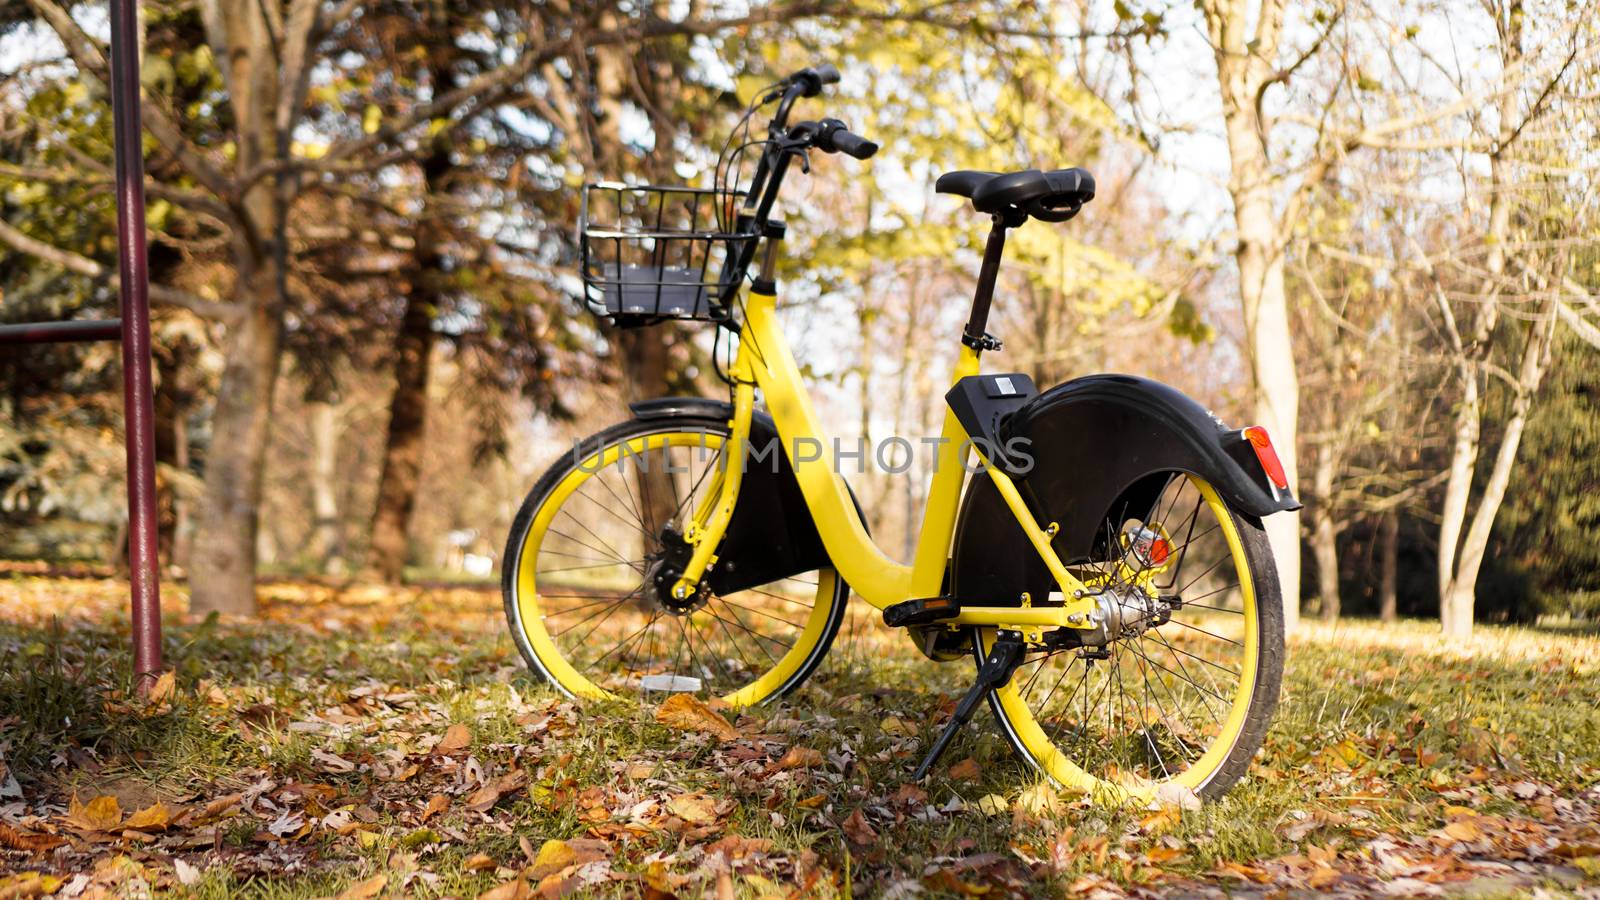 Yellow bike with fallen leaves in the setting sun. Autumn park - sunny day